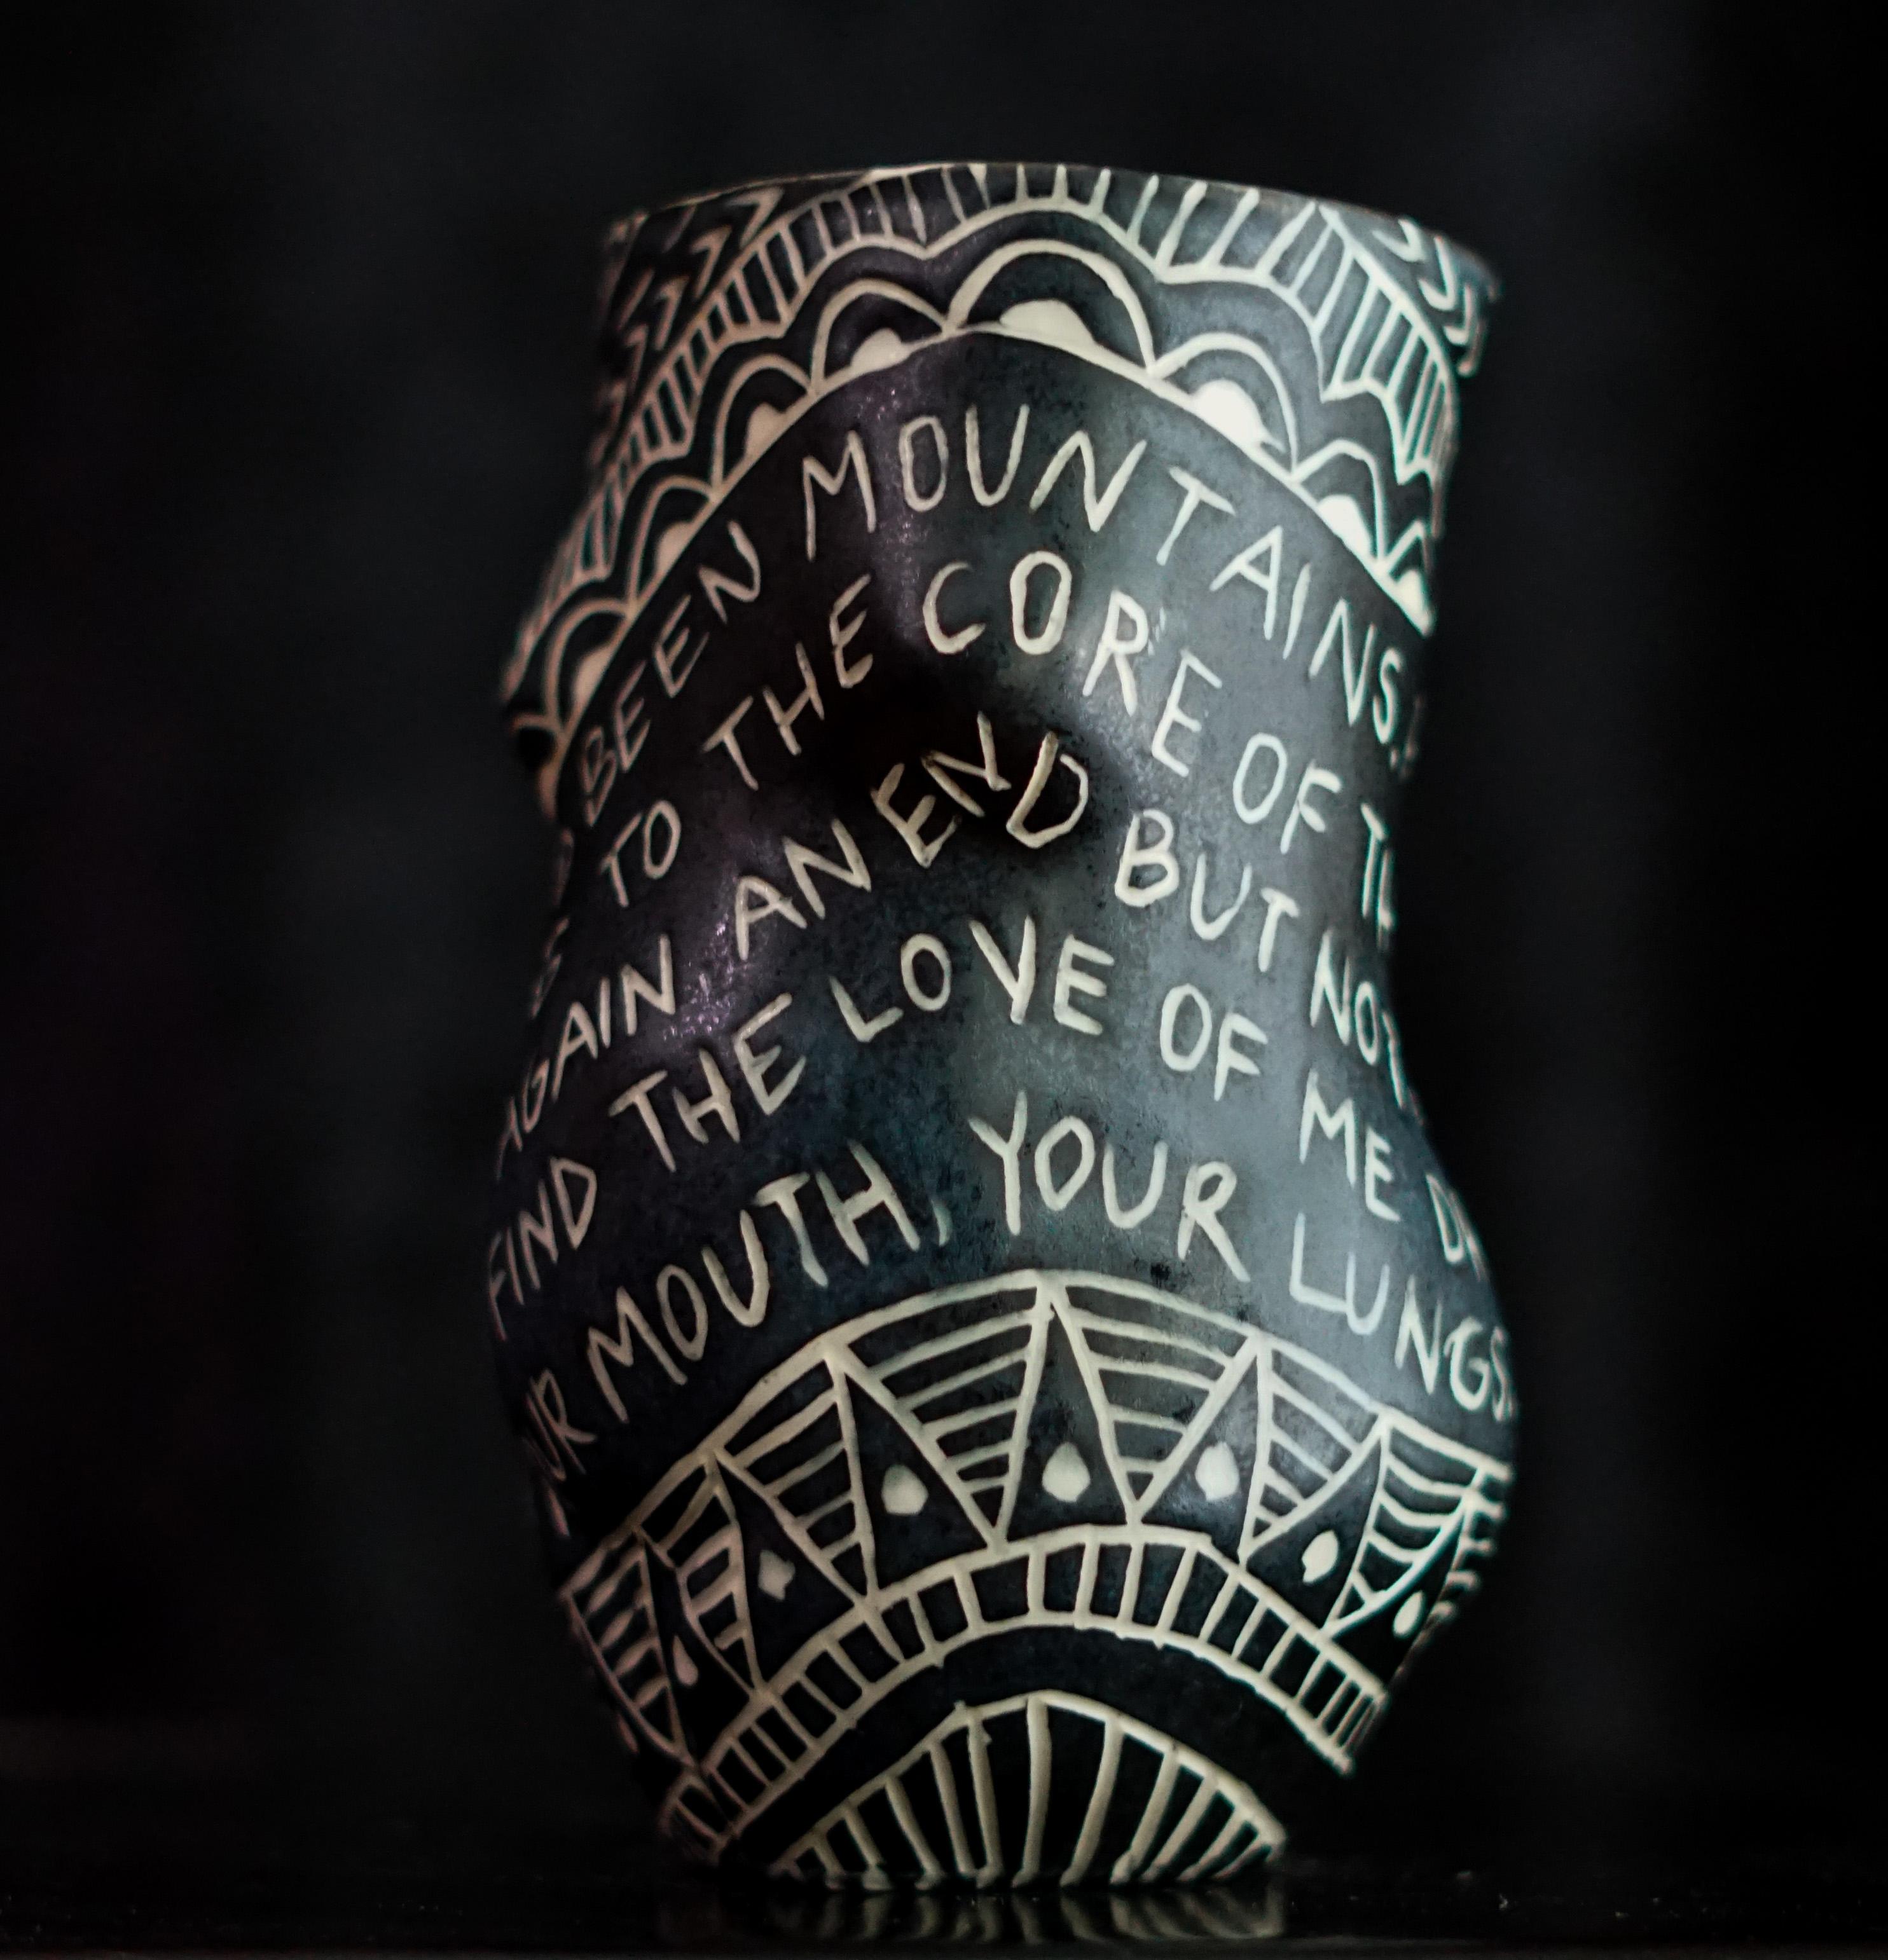 “We had been Mountains...” Porcelain cup with sgraffito detailing - Sculpture by Alex Hodge